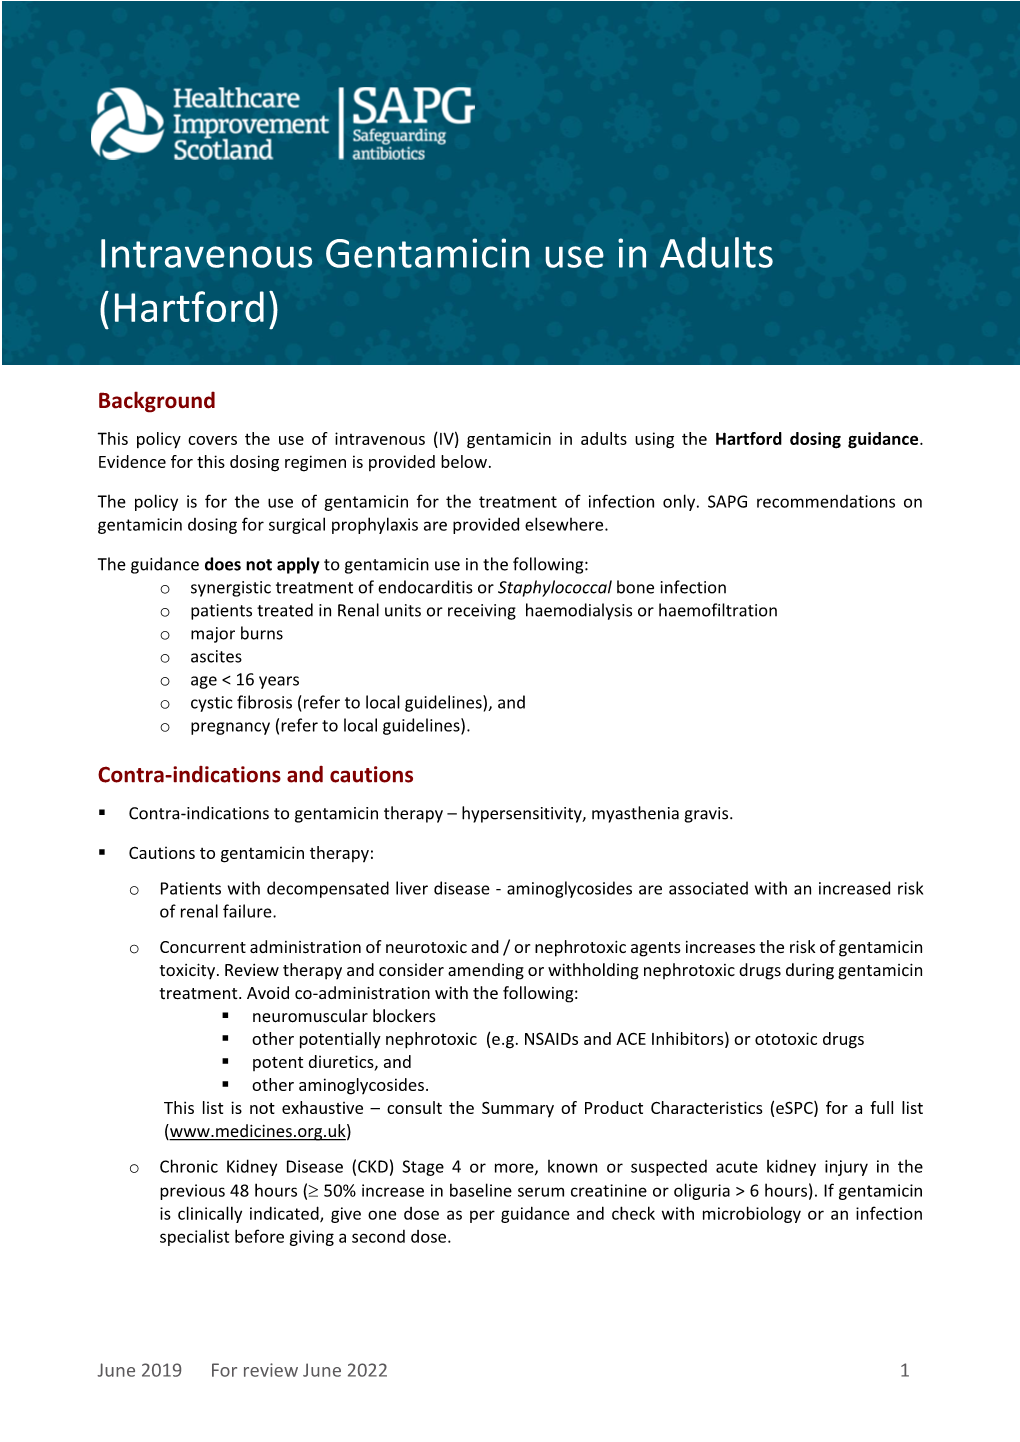 Intravenous Gentamicin Use in Adults (Hartford)